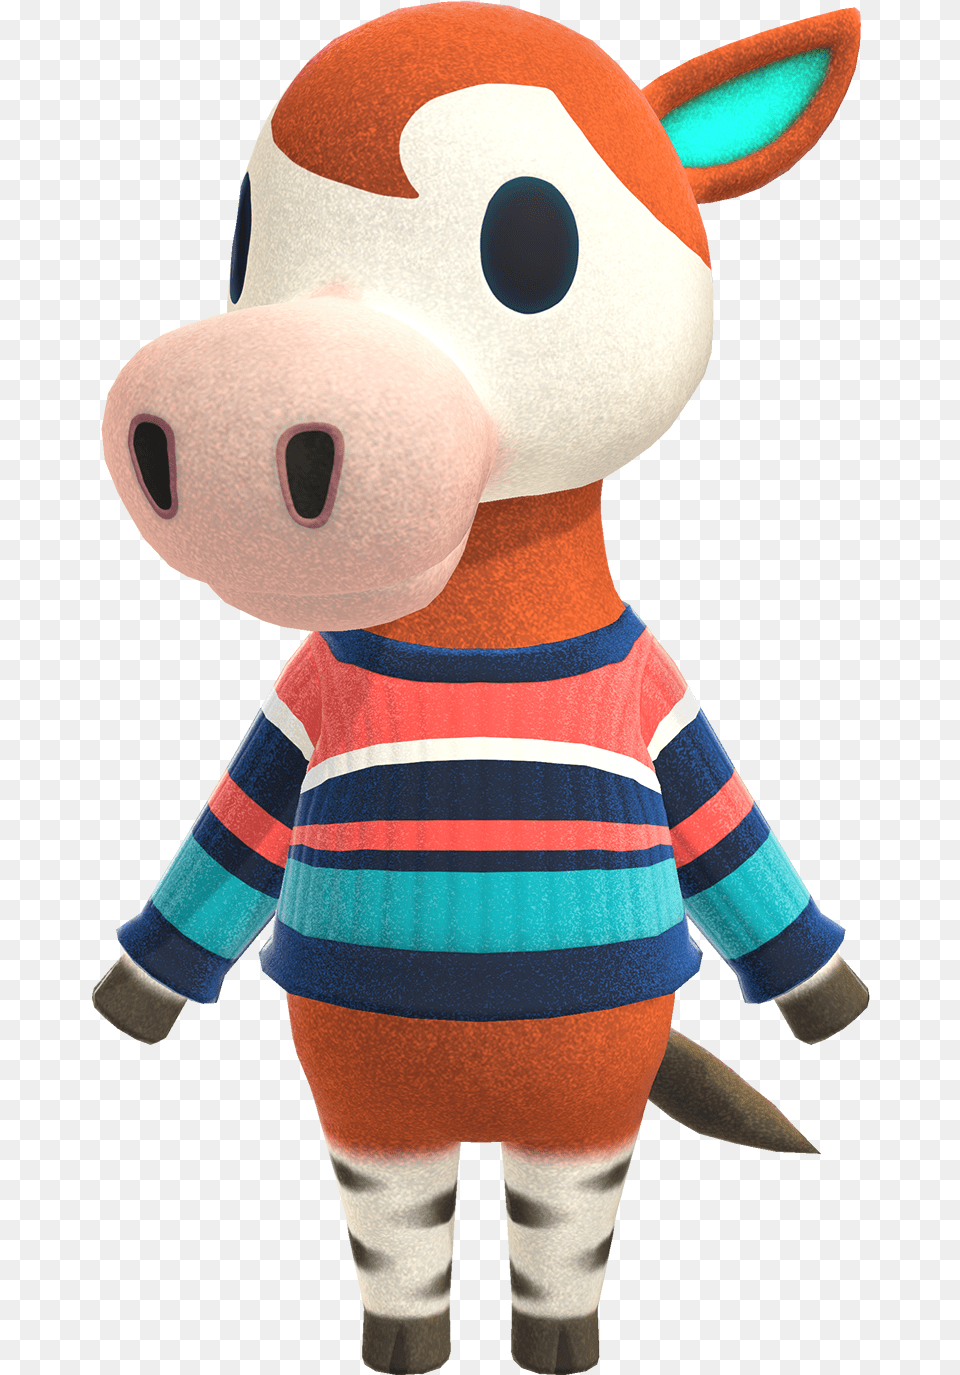 Papi Animal Crossing Wiki Nookipedia Horse Villagers Animal Crossing, Plush, Toy Free Png